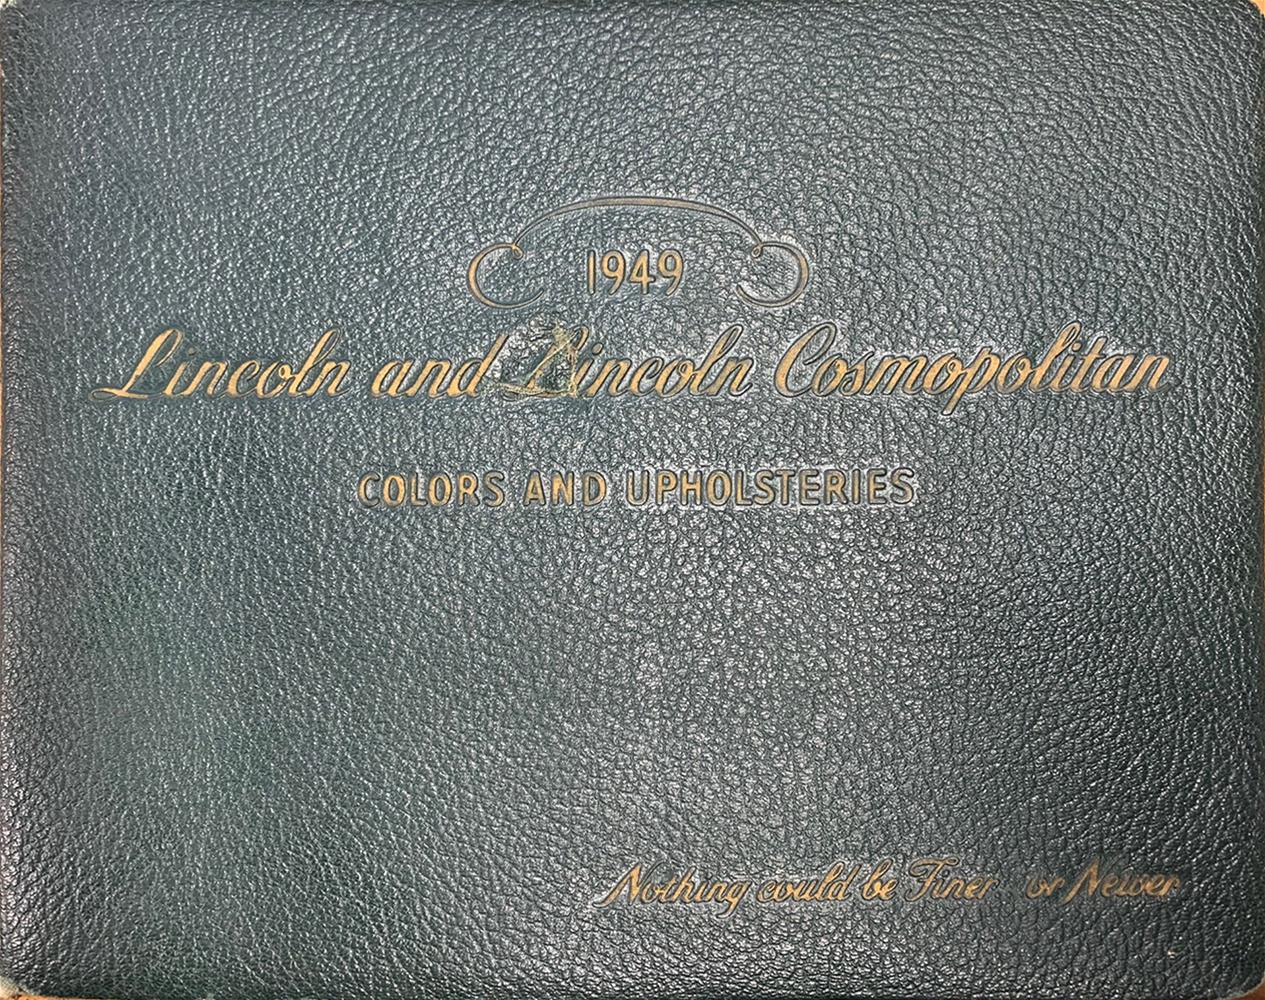 1949 Lincoln Color and Upholstery Dealer Album